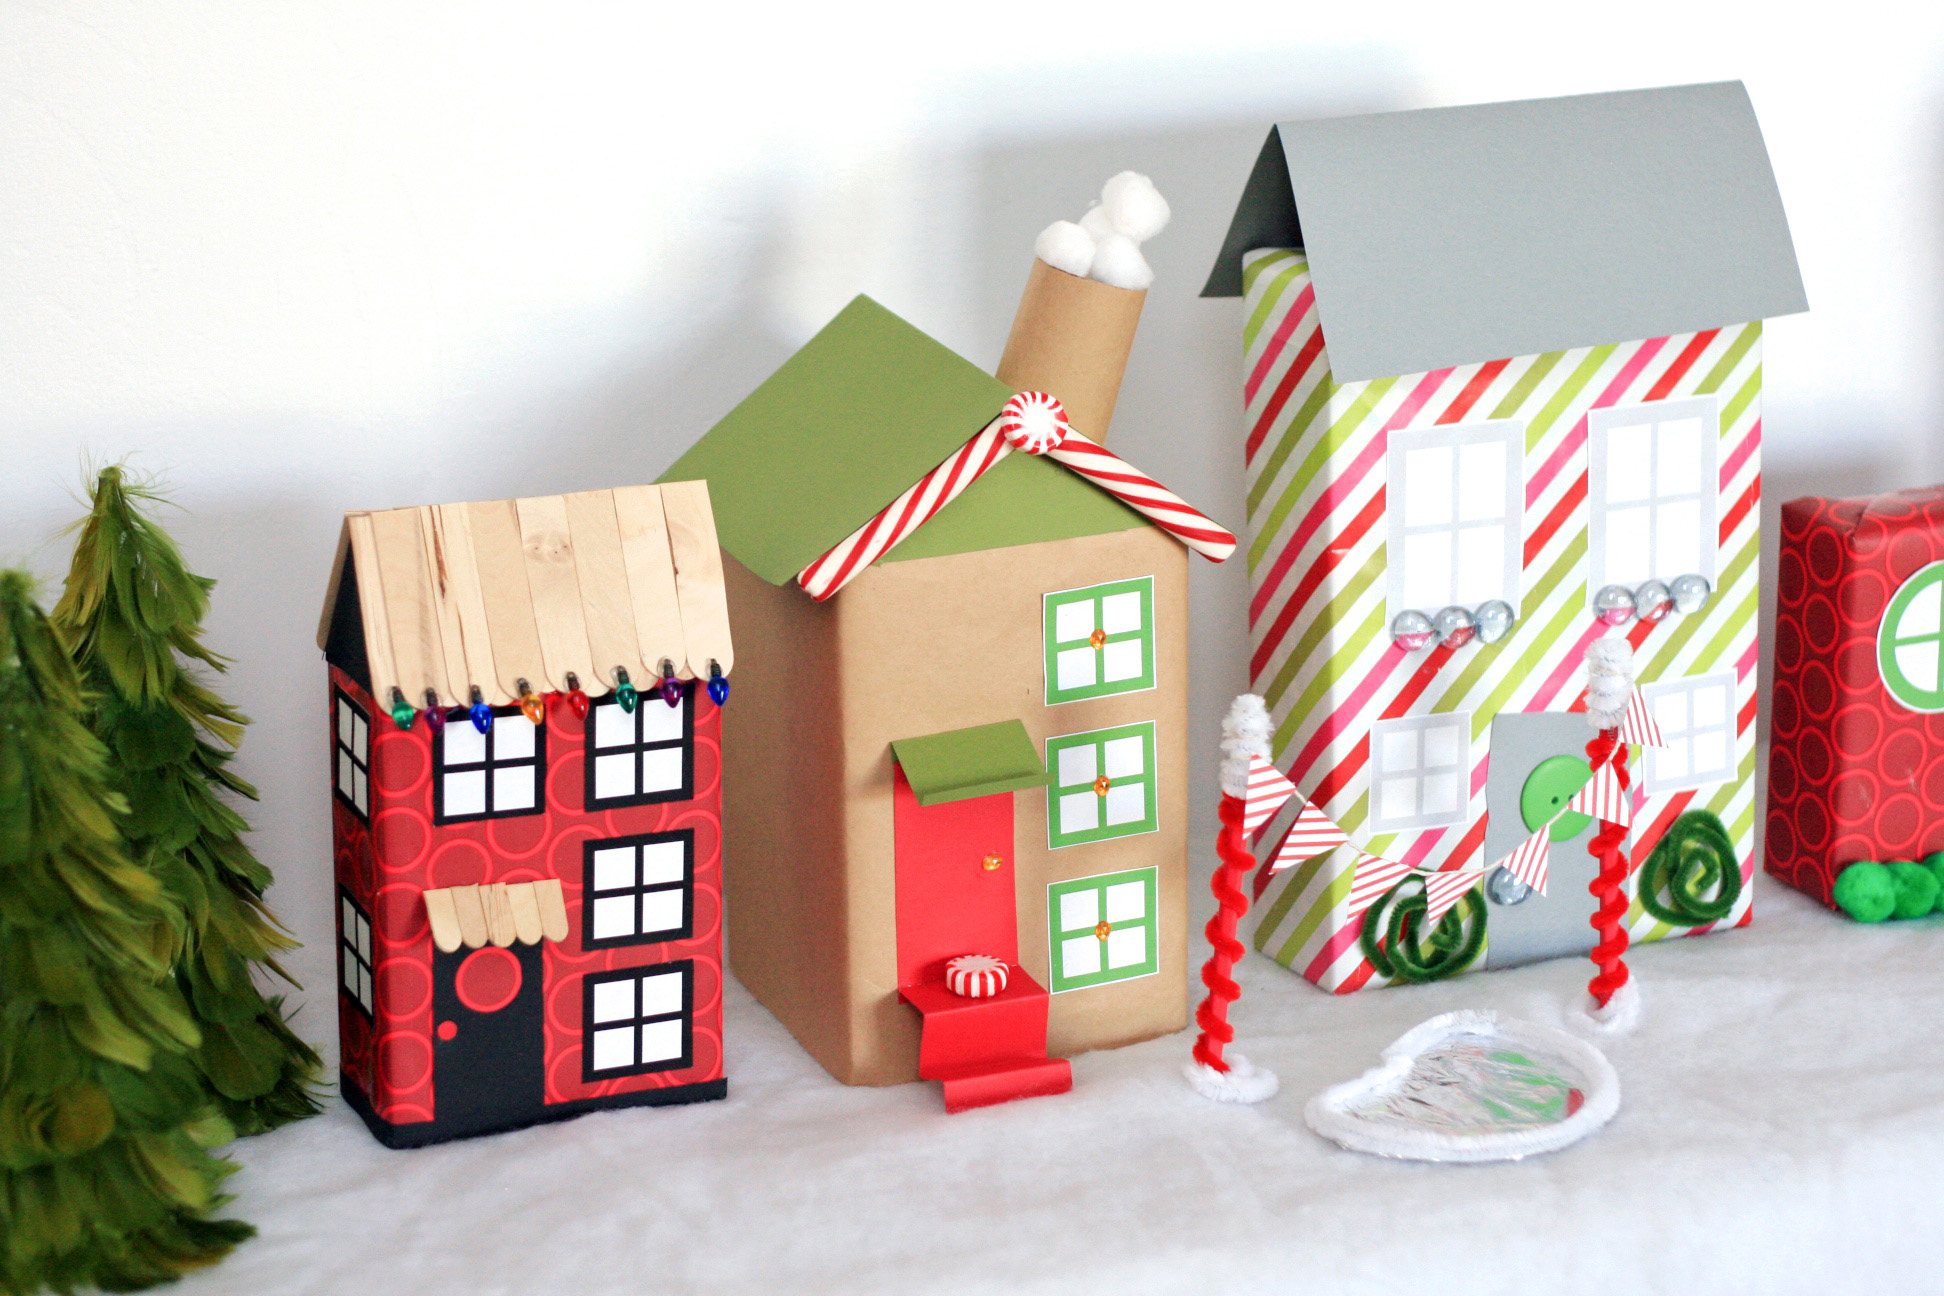 cereal box decors in Christmas DIY decorations for kids bedrooms | lovelyspaces.com